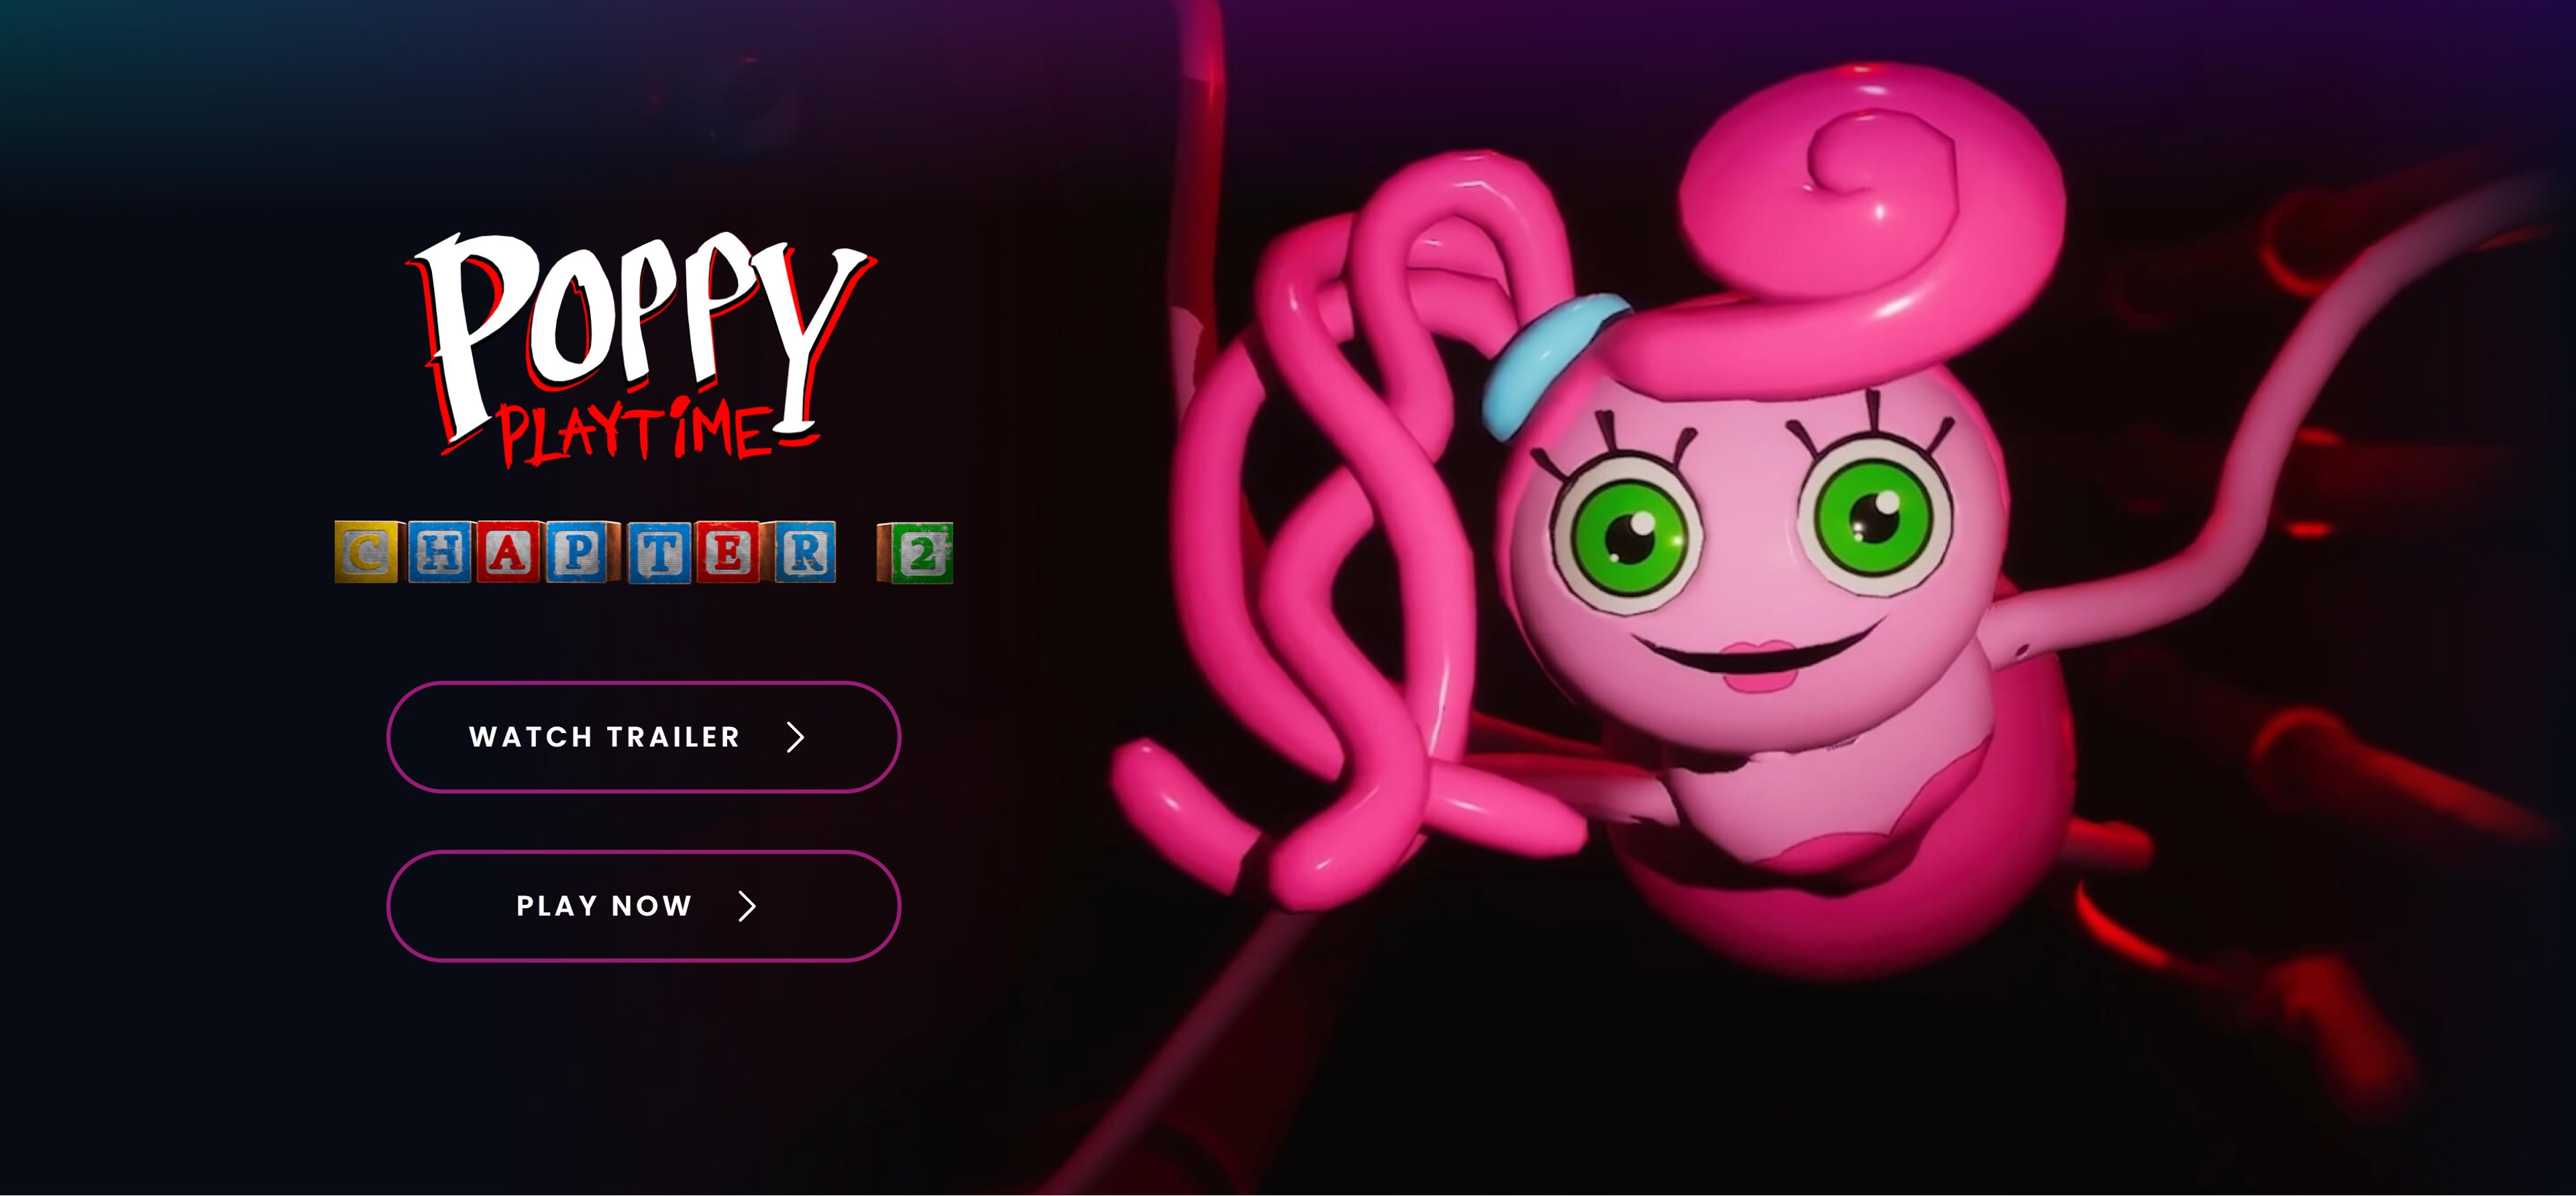 SmackNPie on X: Poopy News: Playtime Co security camera website has been  changed, meaning we're about to see some new content on it. We'll see if  Mommy Long Legs or Poppy is